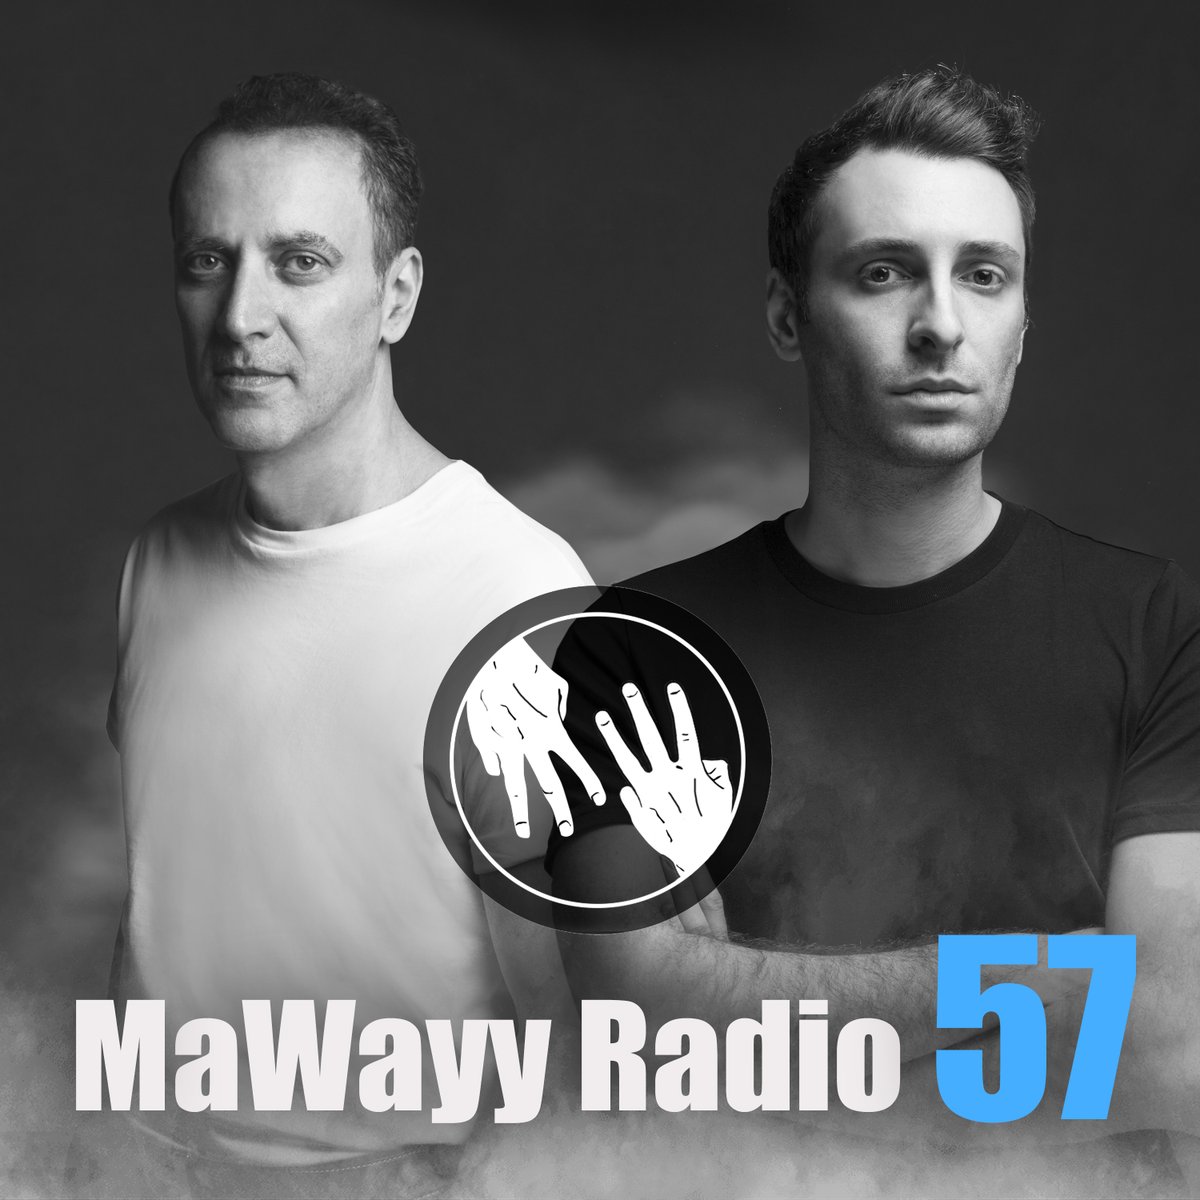 #radioshow's tonight on #webradio https://t.co/8g3SbusSqo
#nowplaying Babes Exploration of #Trance
20 @MarkusSchulz Sugar #Radio 
21 @MaWayyOfficial https://t.co/Sn14hJQjP4